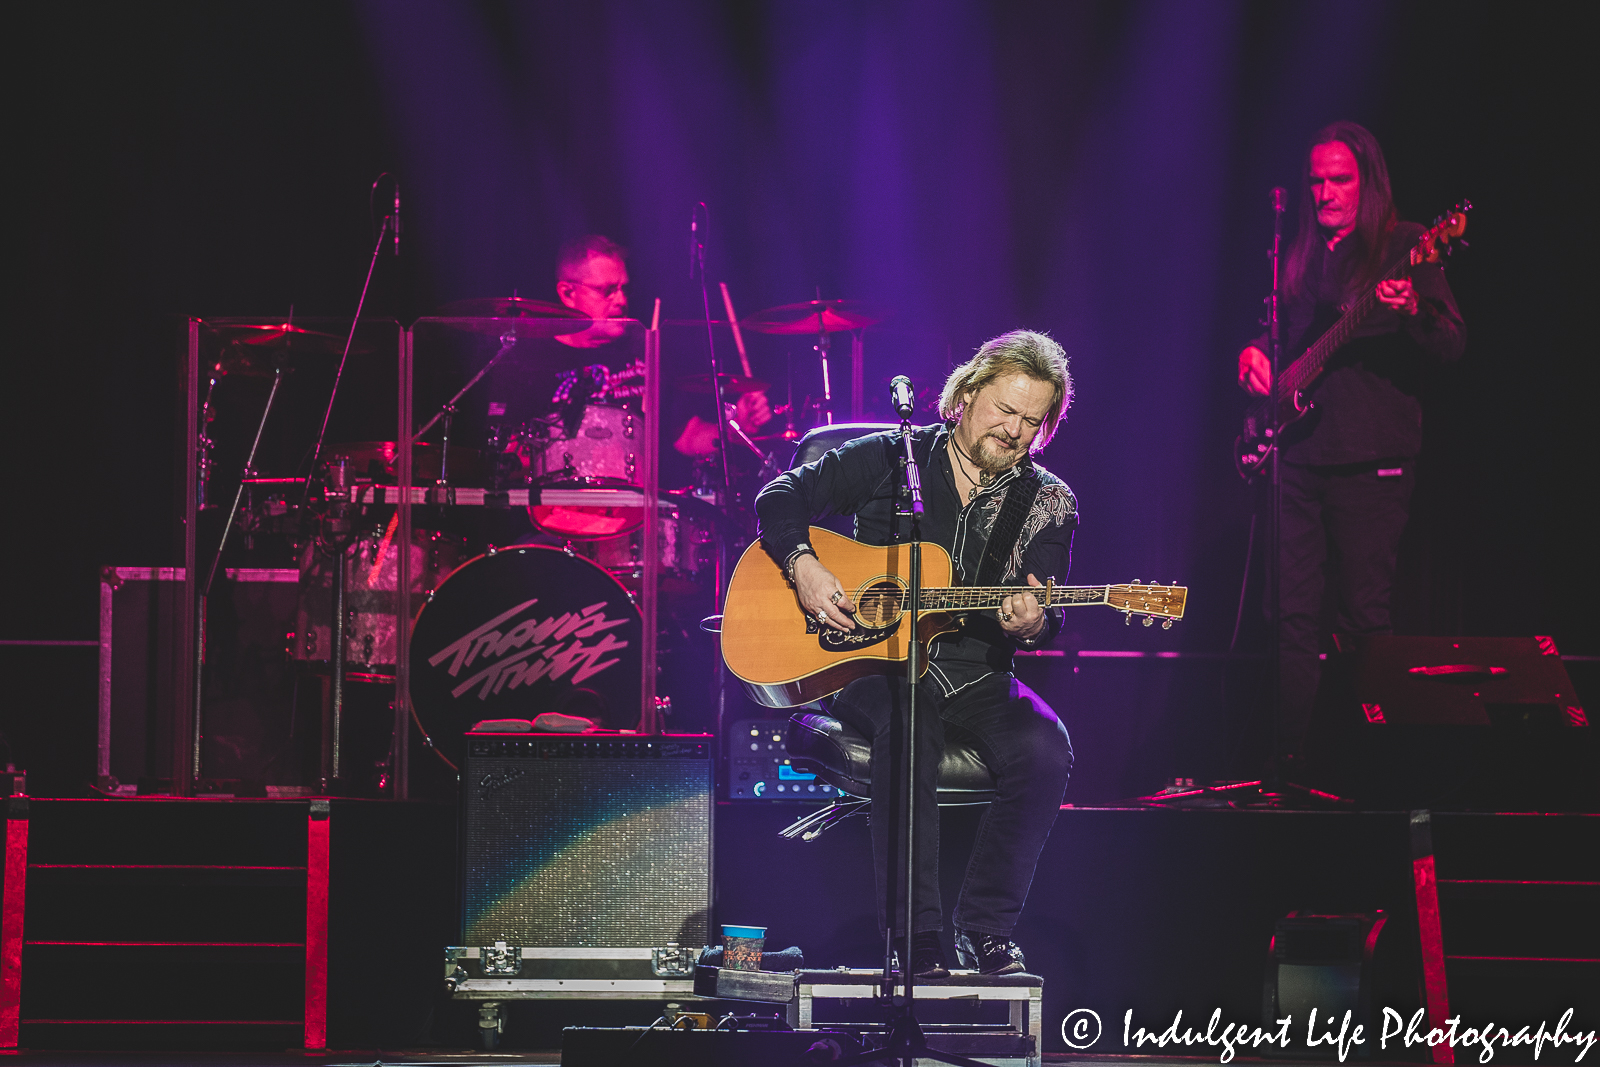 Travis Tritt performing live with his drummer and bass guitarist at Ameristar Casino Kansas City on December 10, 2022.